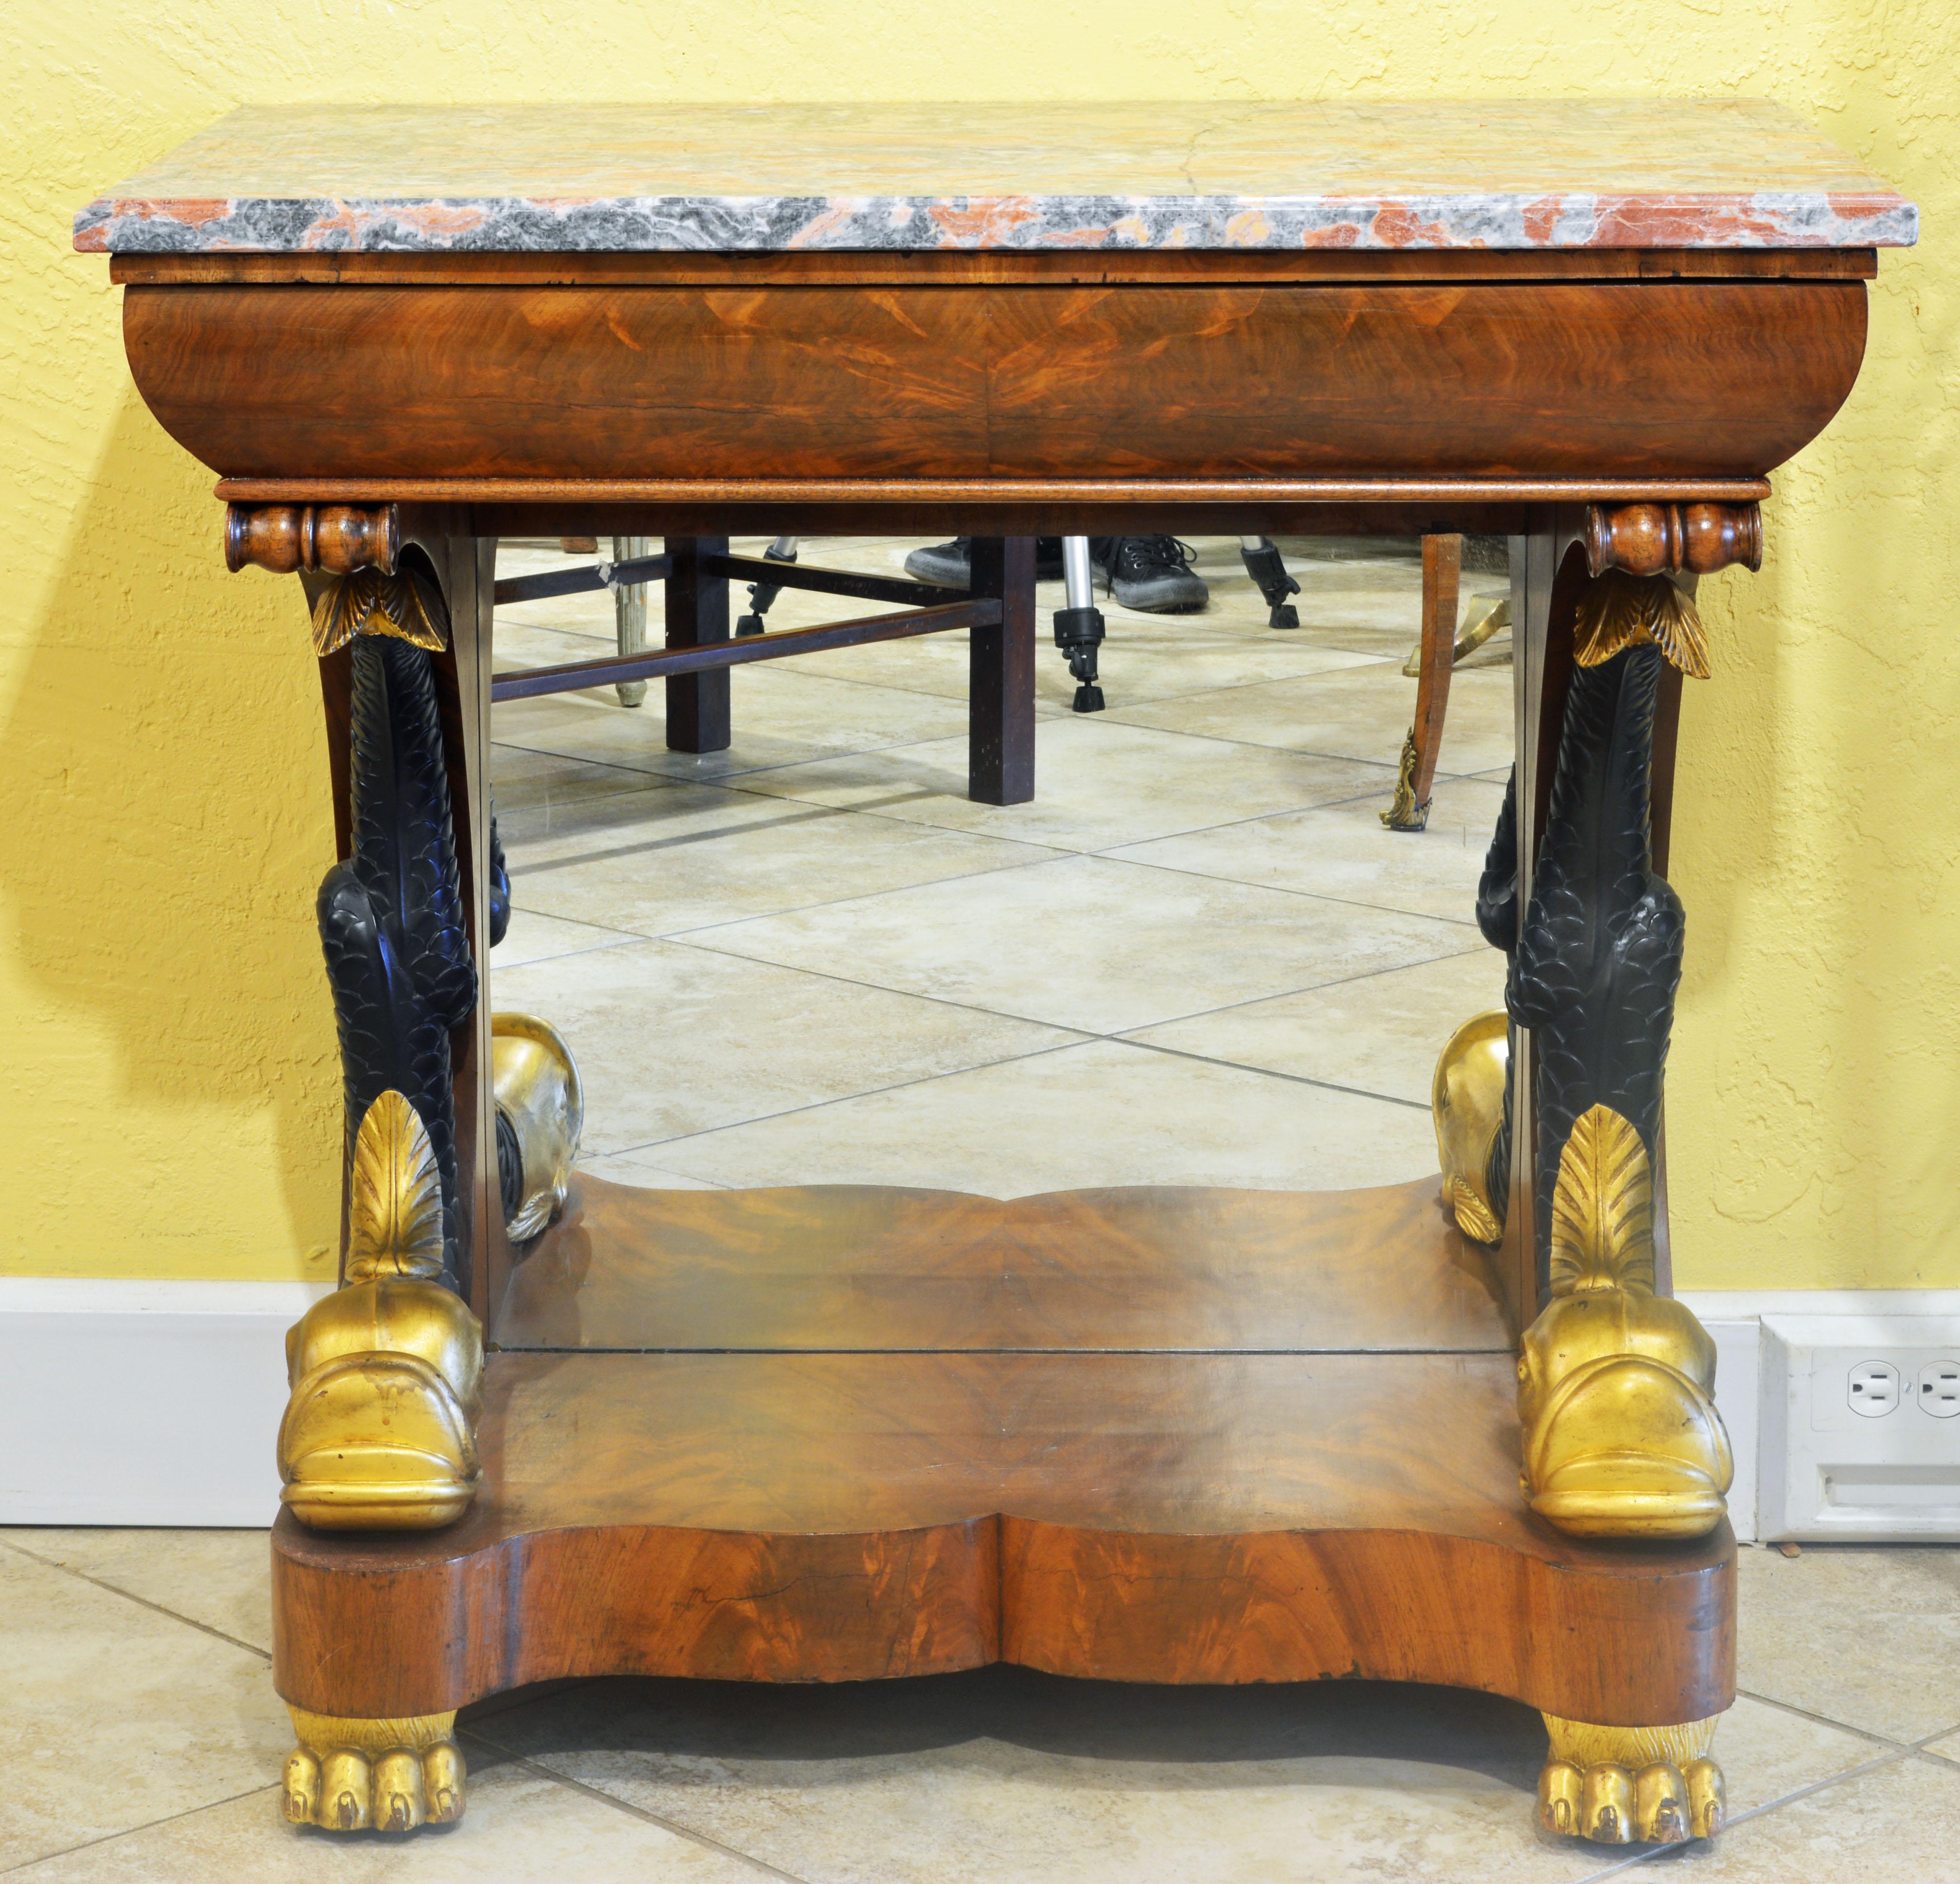 This great console table features a Siena marble top above a curved frieze fashioned as a drawer. It rests on two elaborately carved upswung dolphins with gilt heads and ebonized tails sitting with a mirrored back panel on the shaped base and gilt